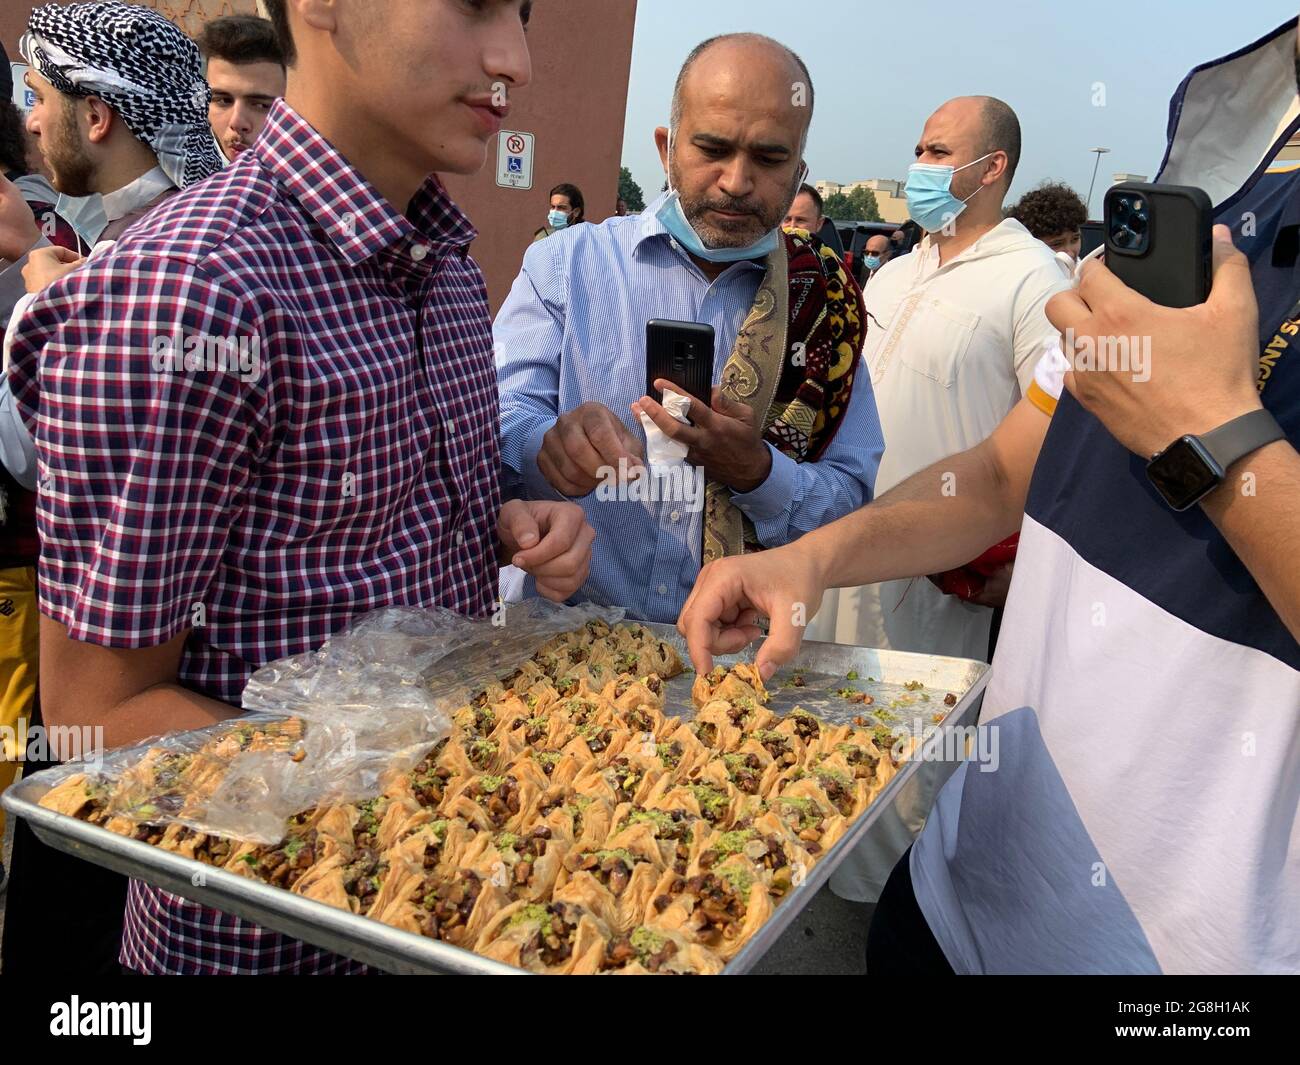 Men having Arabic sweets as a crowd Muslim worshippers gather outdoor at the Hamilton Mountain mosque to worship and celebrate Eid festival. Stock Photo